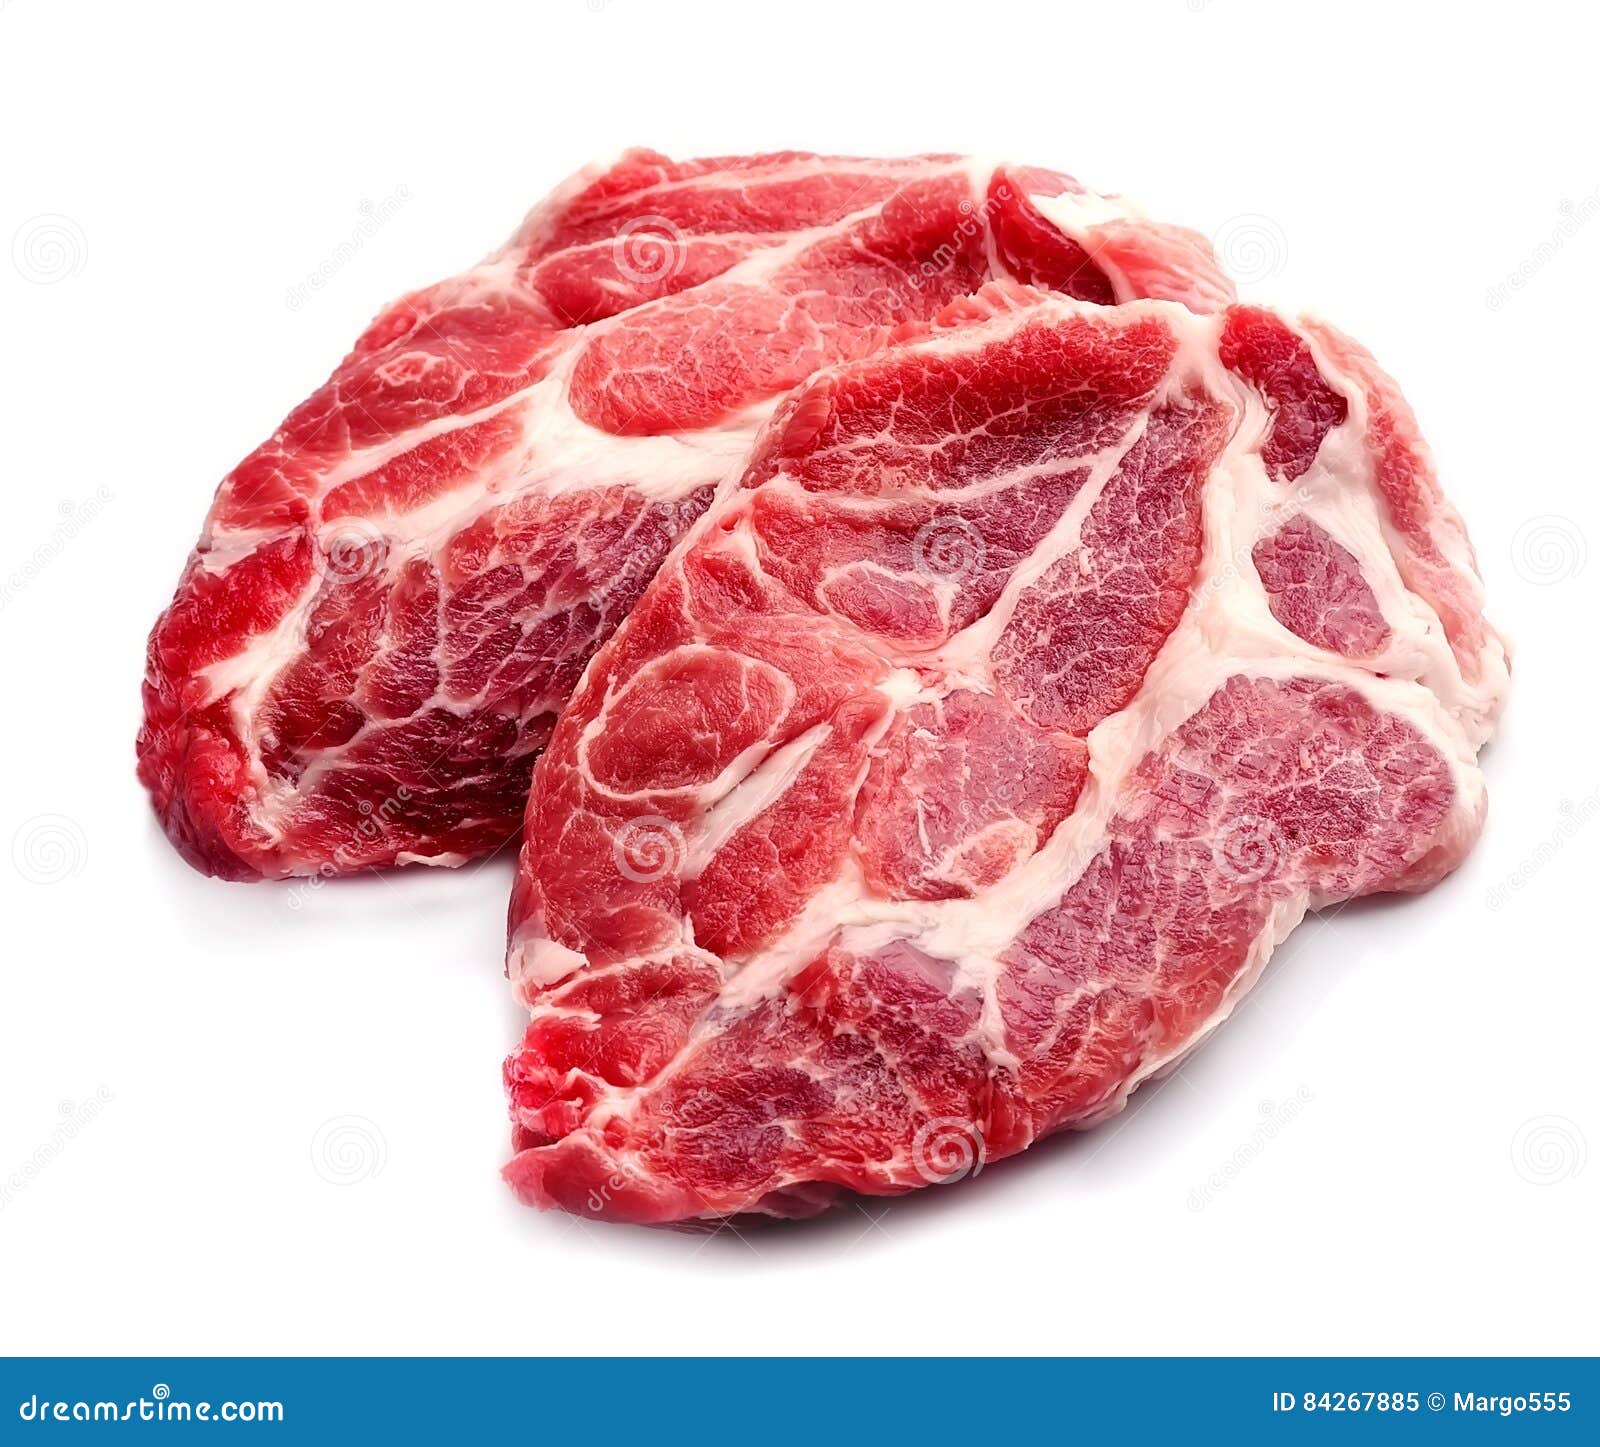 Pork meat isolated on a white backgrounds